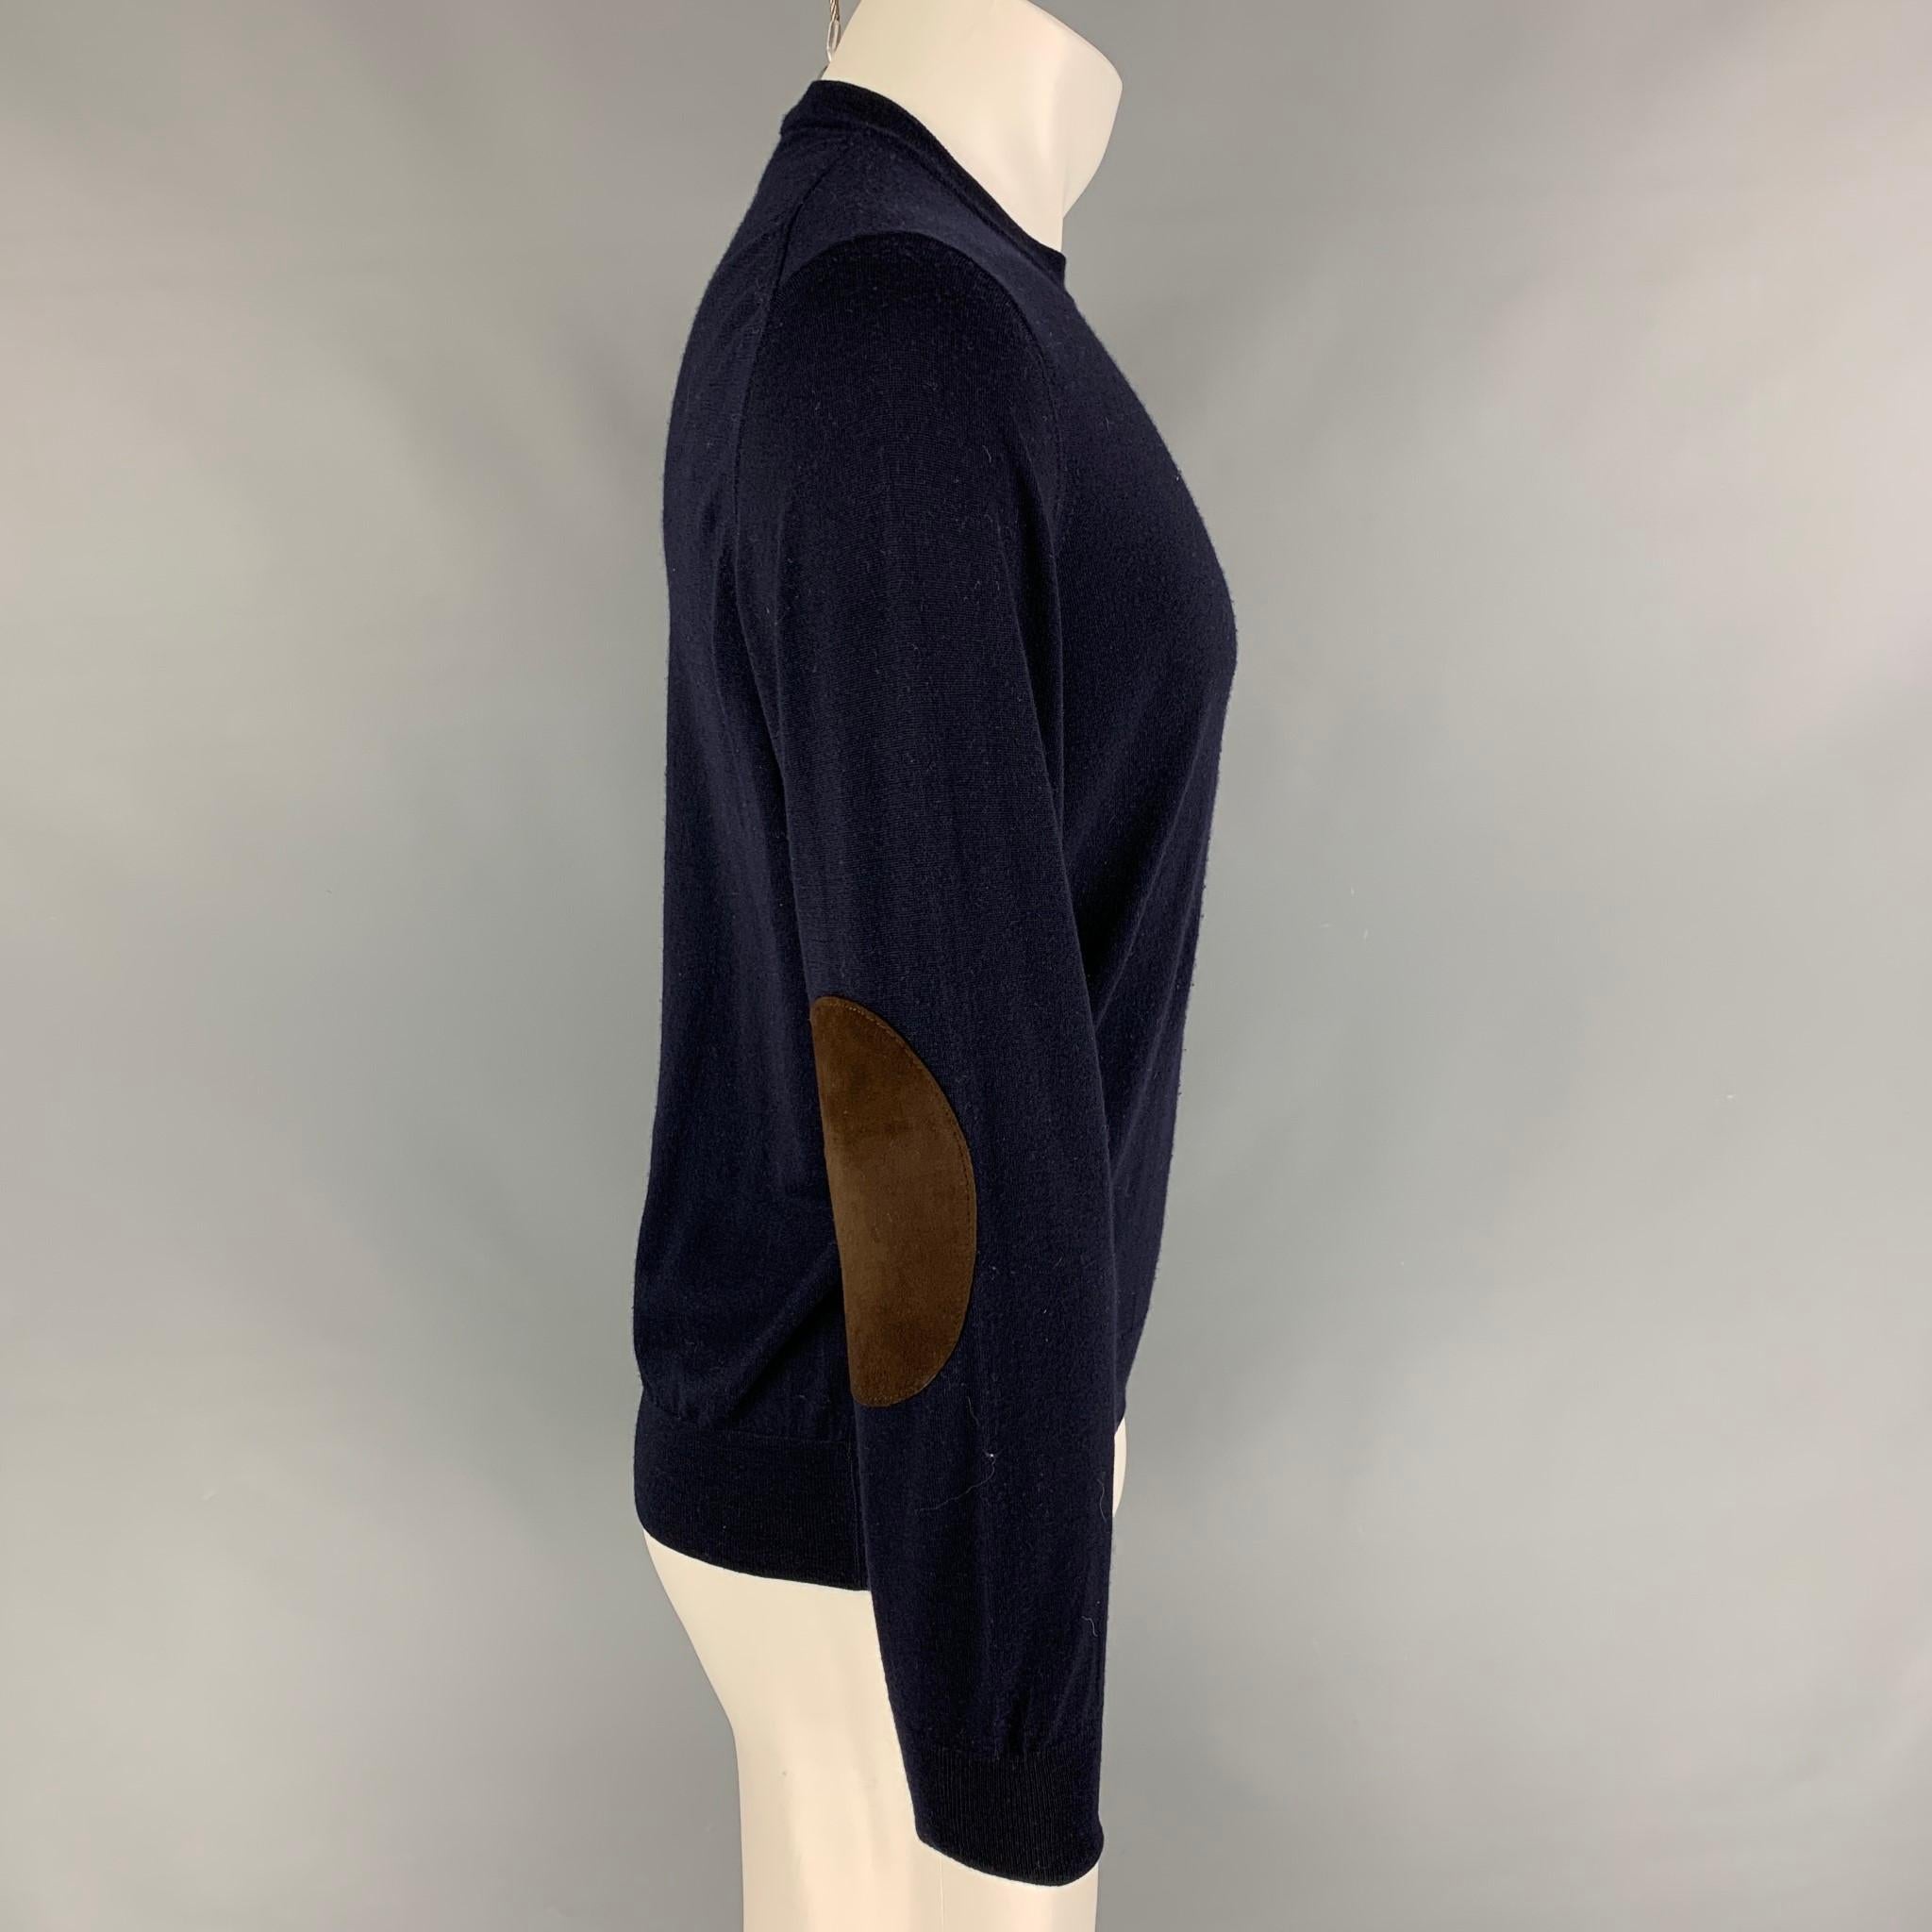 BRUNELLO CUCINELLI pullover comes in a navy wool / cashmere featuring brown suede elbow patches and a crew-neck. Made in Italy. 

Good Pre-Owned Condition.
Marked: 48

Measurements:

Shoulder: 17.5 in.
Chest: 38 in.
Sleeve: 27 in.
Length: 25 in. 